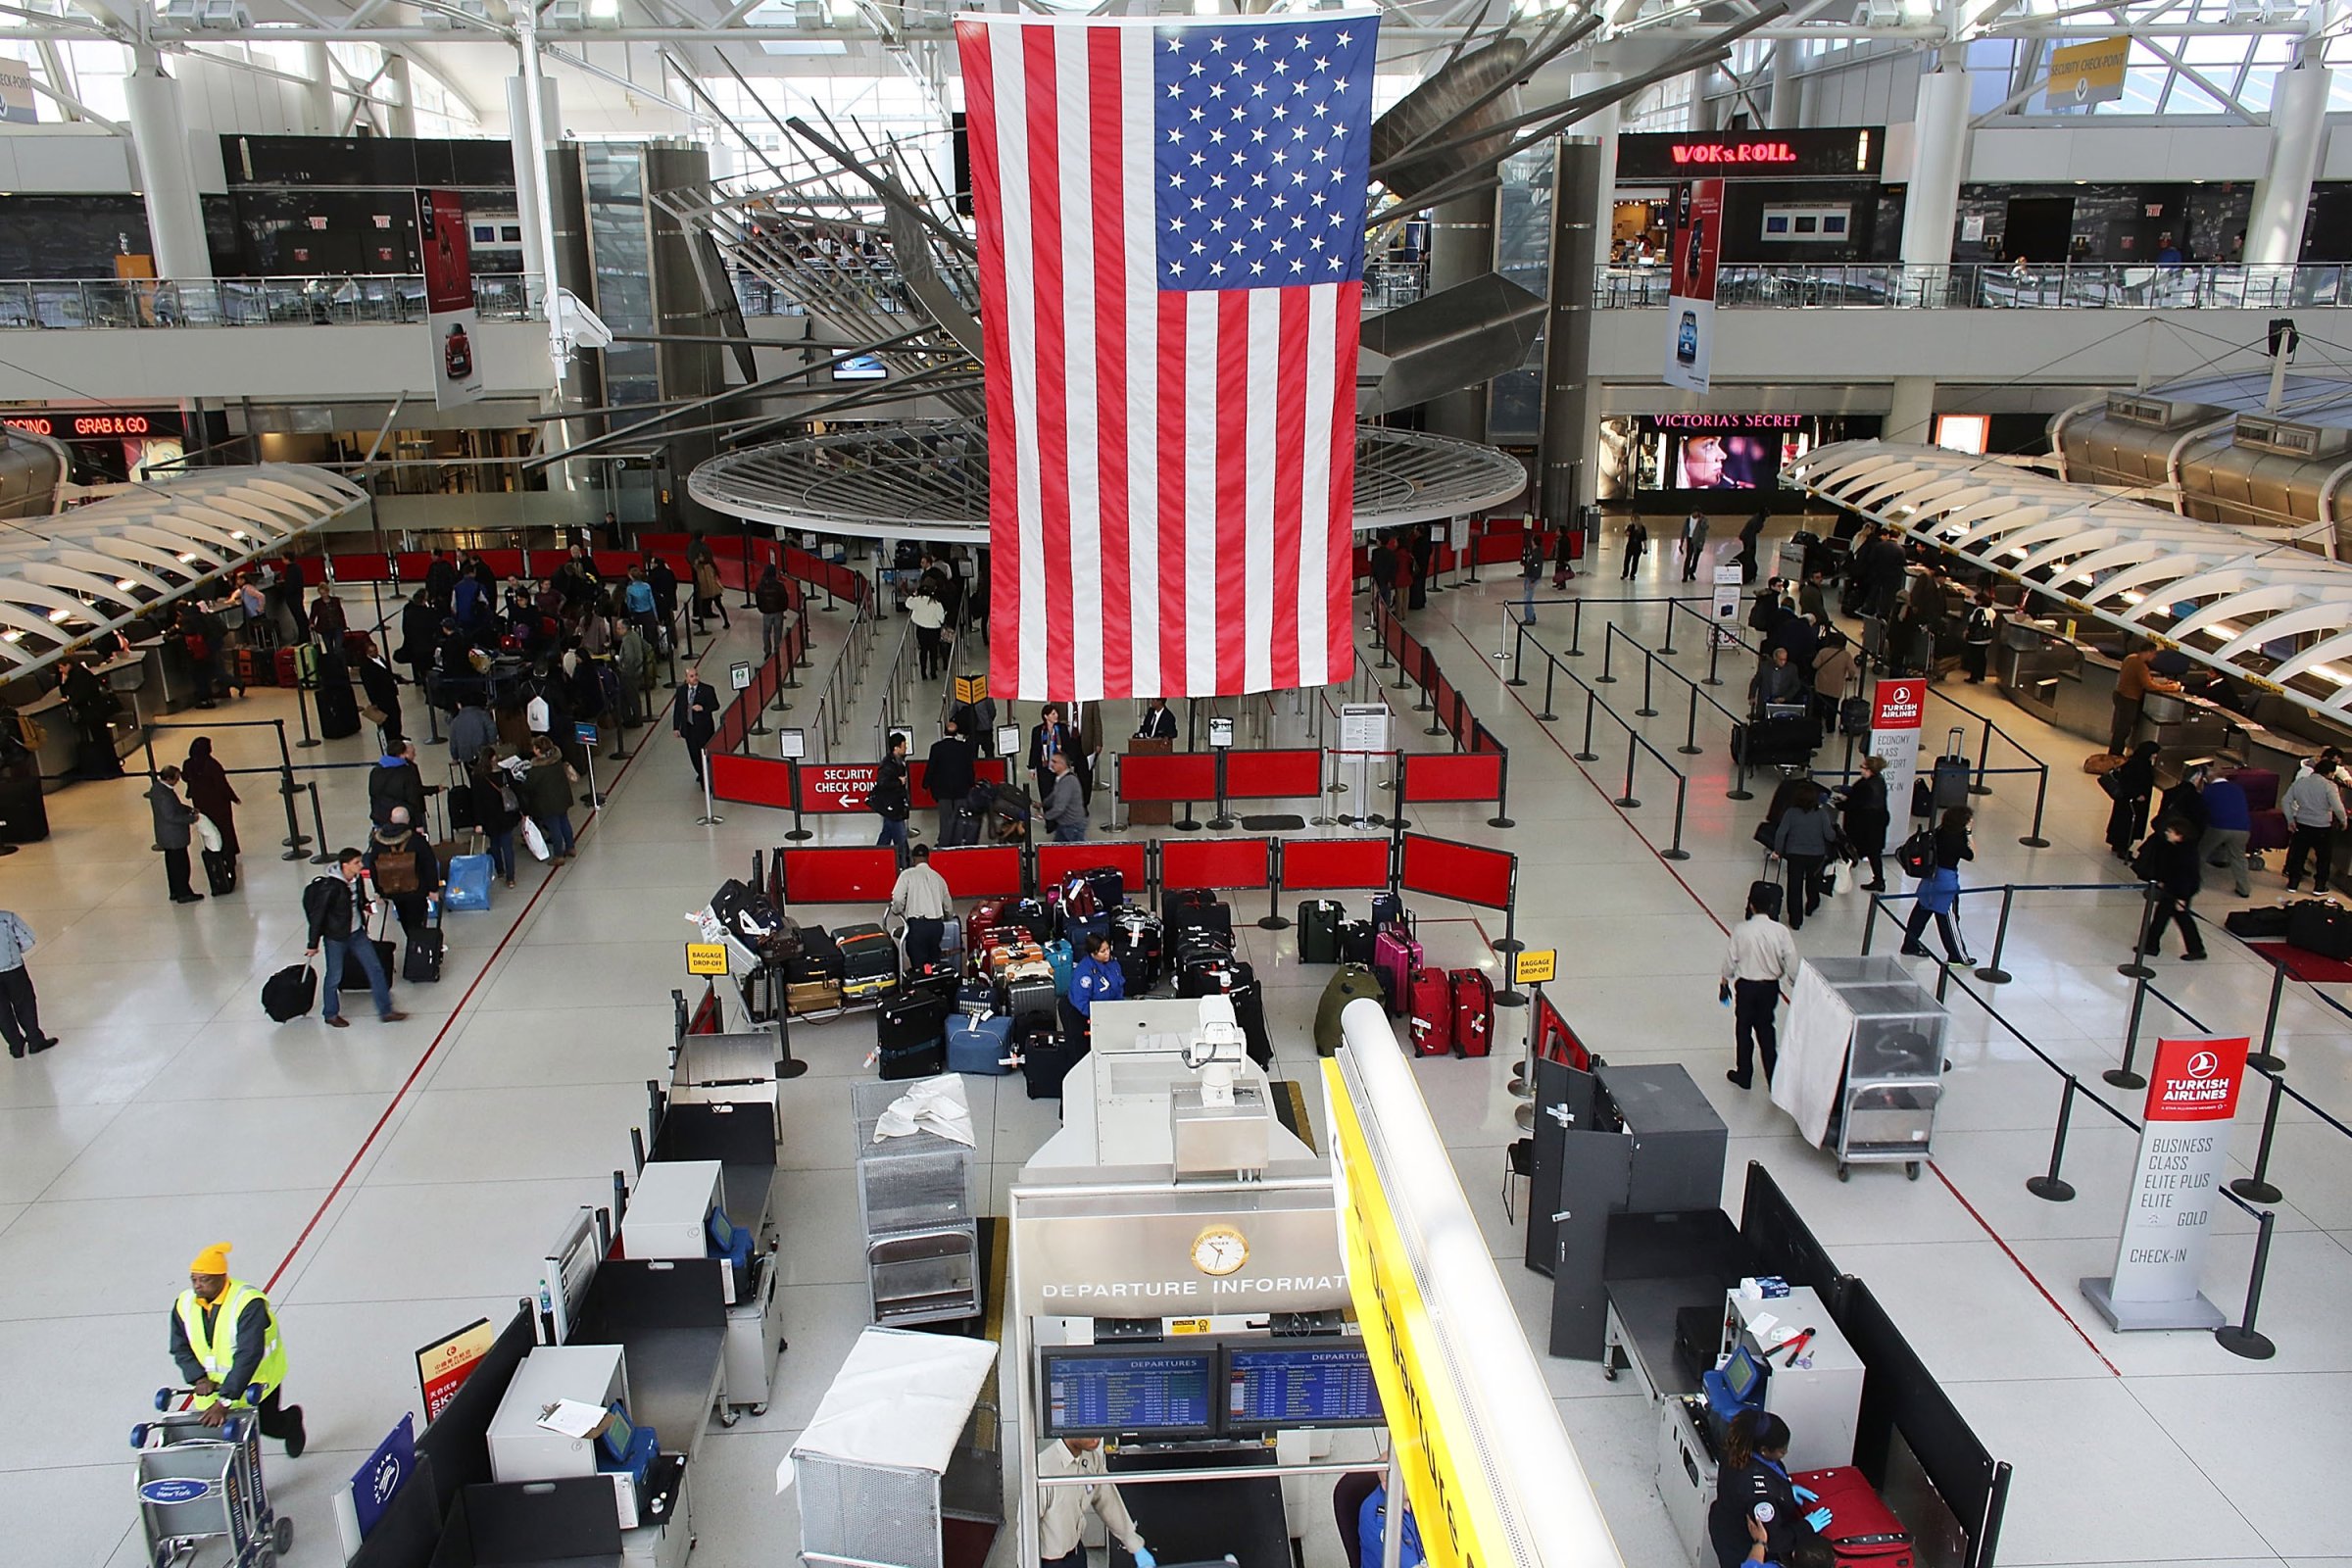 Sequester Cuts Expected To Cause Delays At U.S. Airports